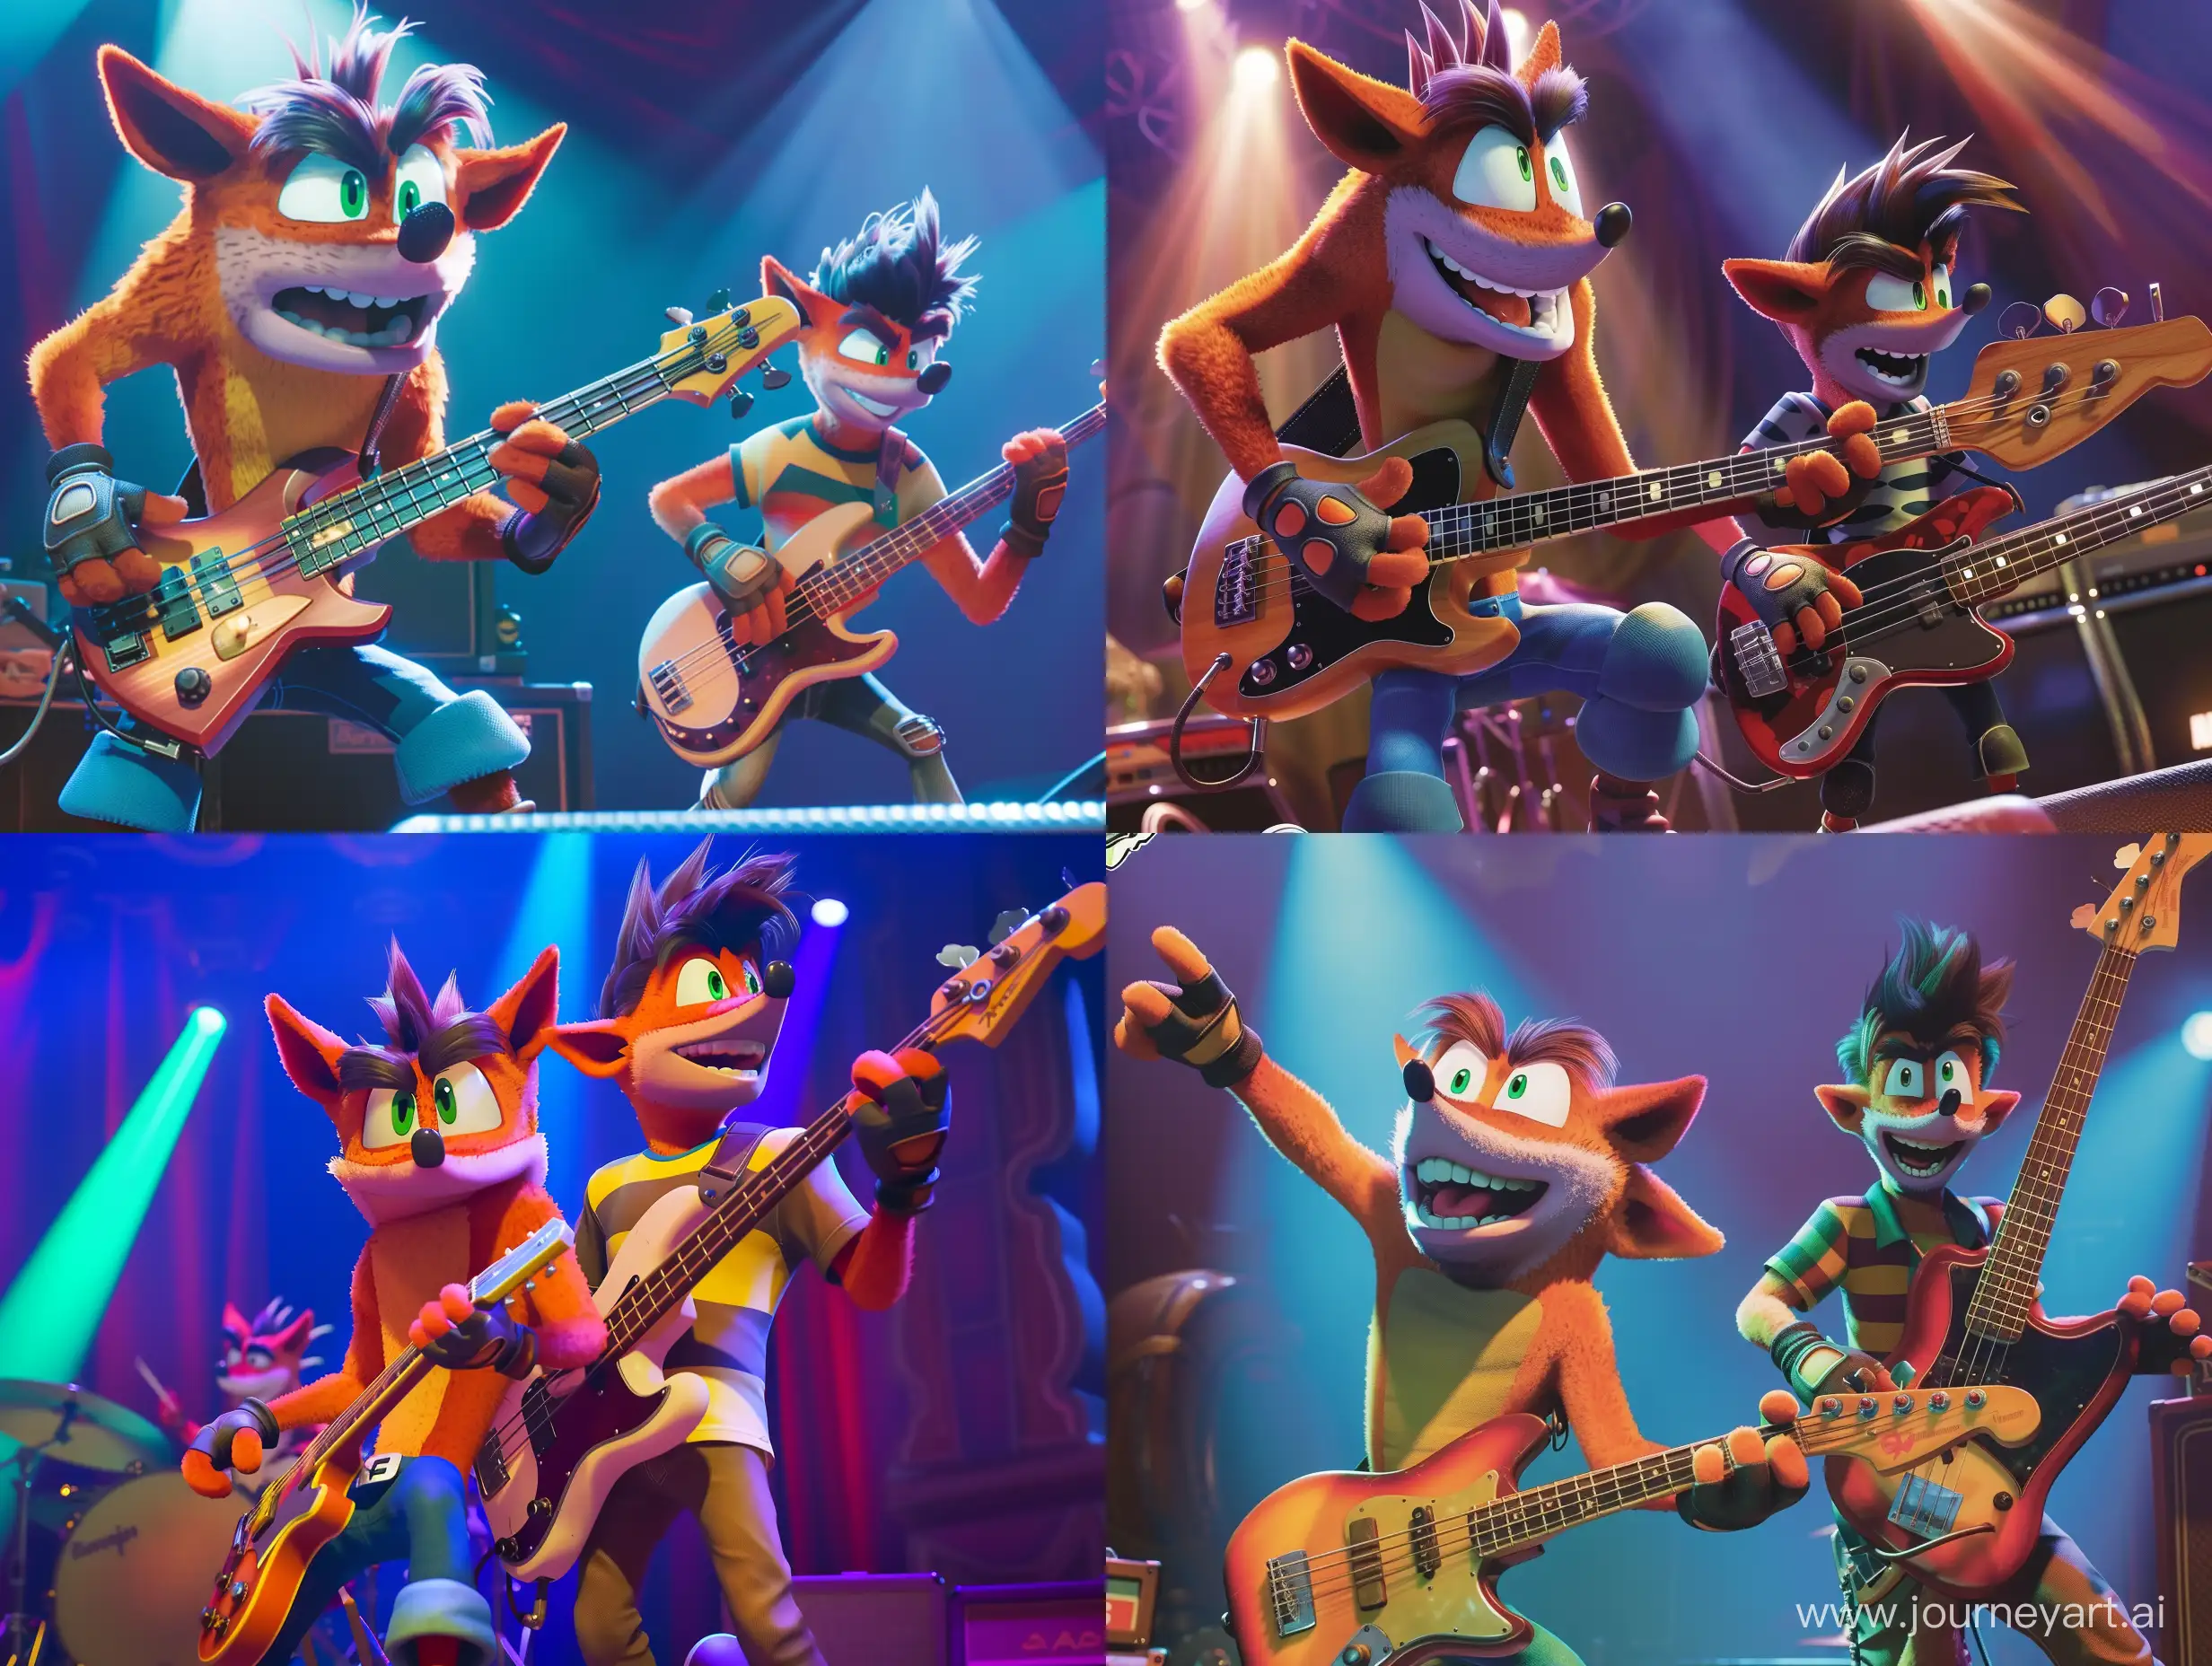 Energetic-Bandicoot-Concert-with-Crash-on-Electric-Guitar-and-Young-Bandicoot-on-Bass